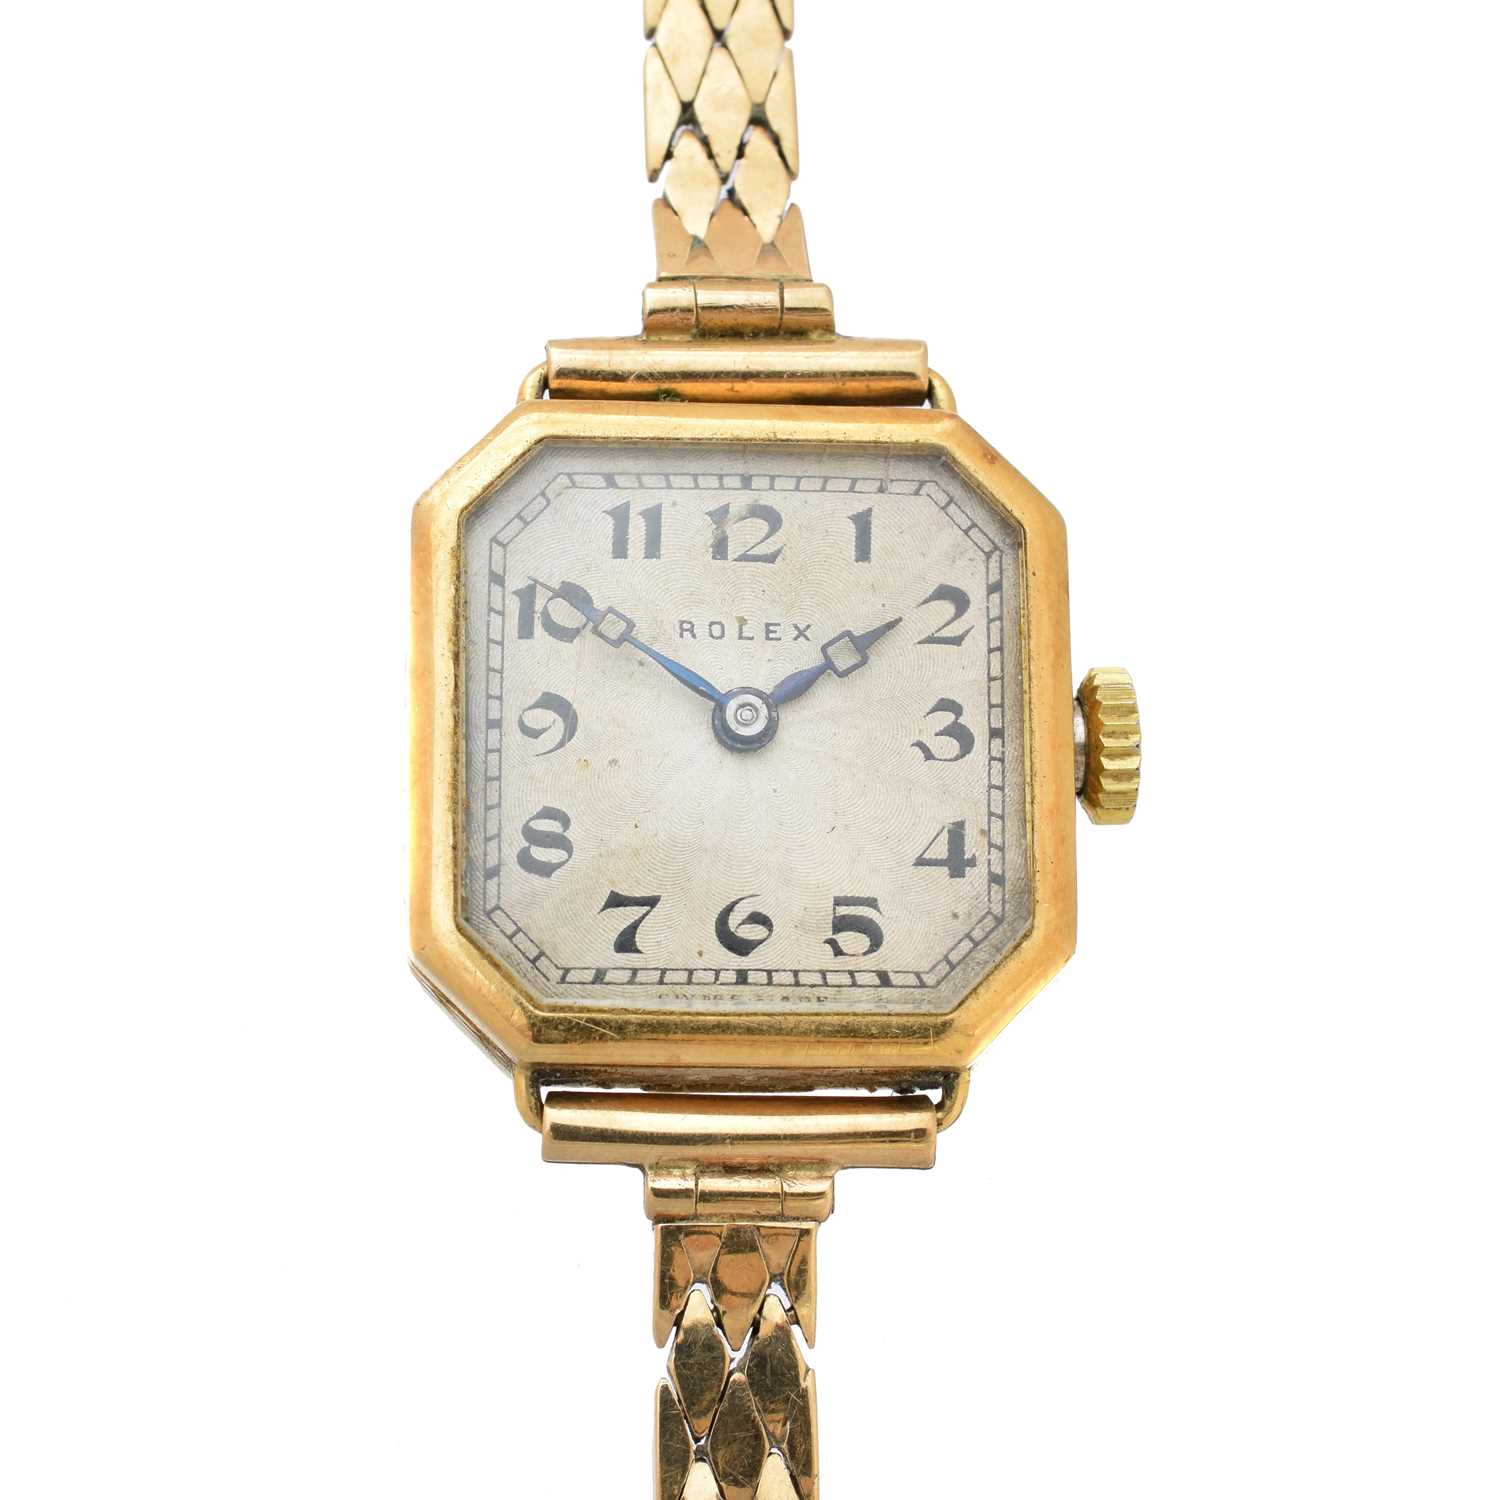 Lot 281 - An early 20th century 18ct gold Rolex watch,